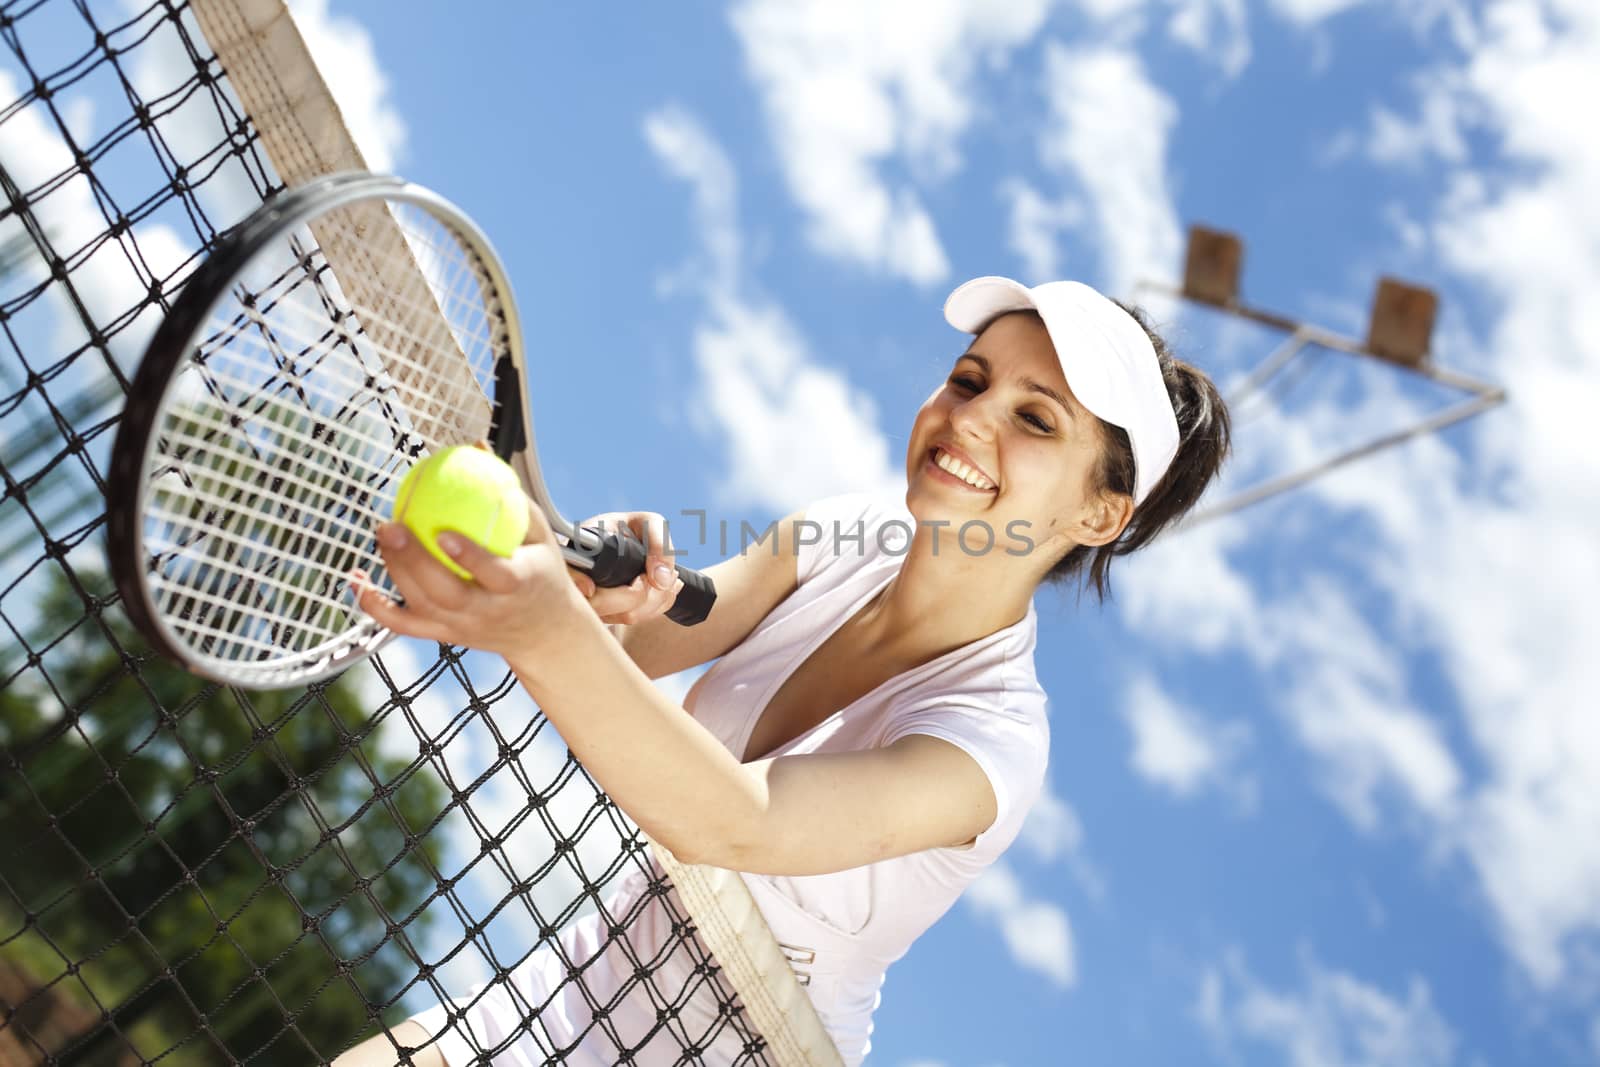 Young woman playing tennis, natural colorful tone